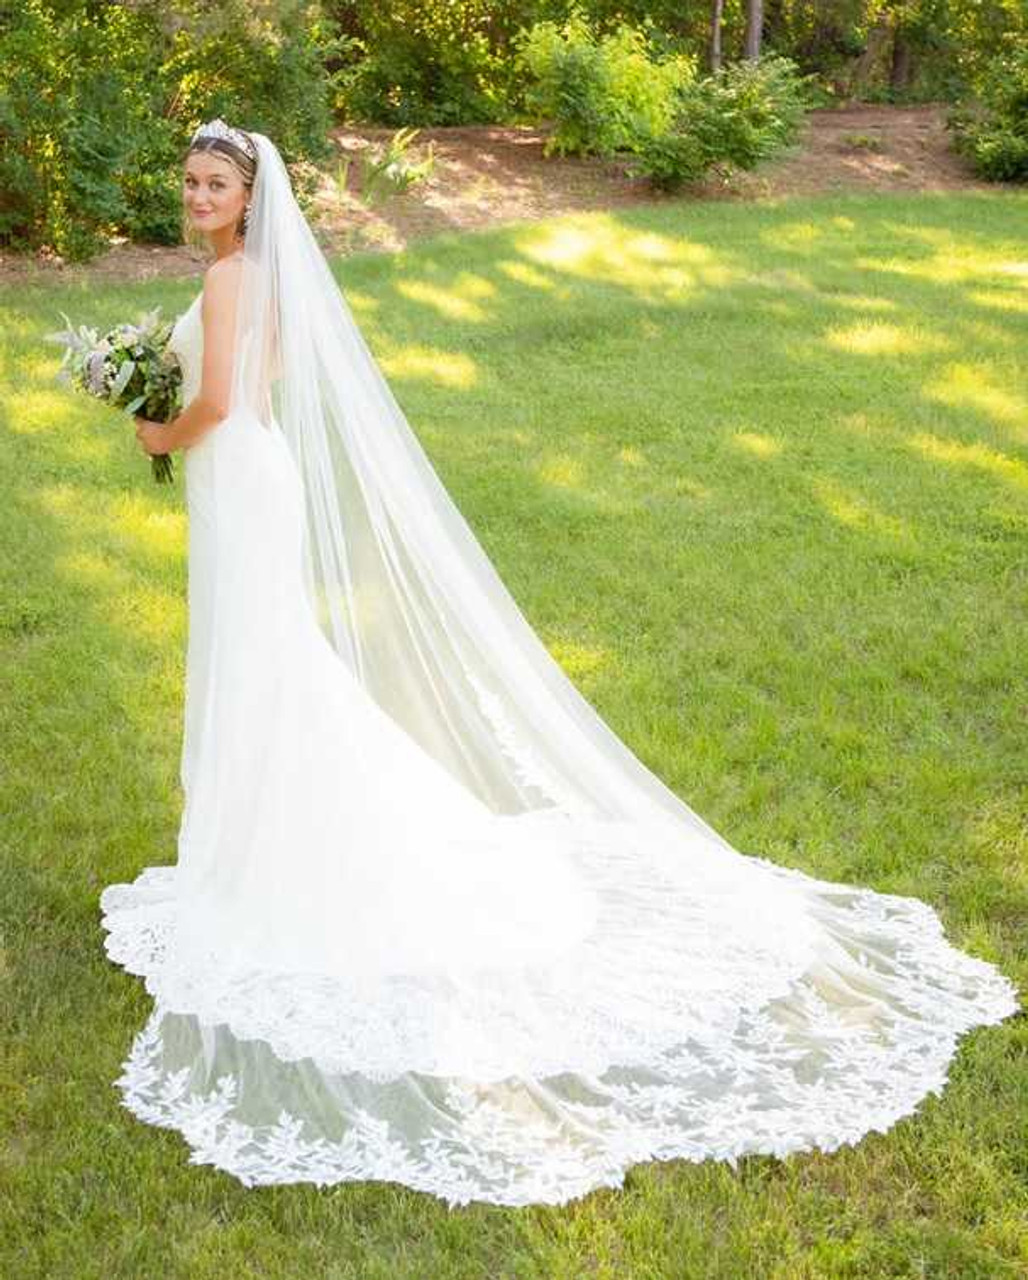 https://cdn11.bigcommerce.com/s-zb3qt33o/images/stencil/1280x1280/products/19429/59006/Multi-Scallop-Lace-Cathedral-Wedding-Veil-CF274_50903__18851.1690398301.jpg?c=2